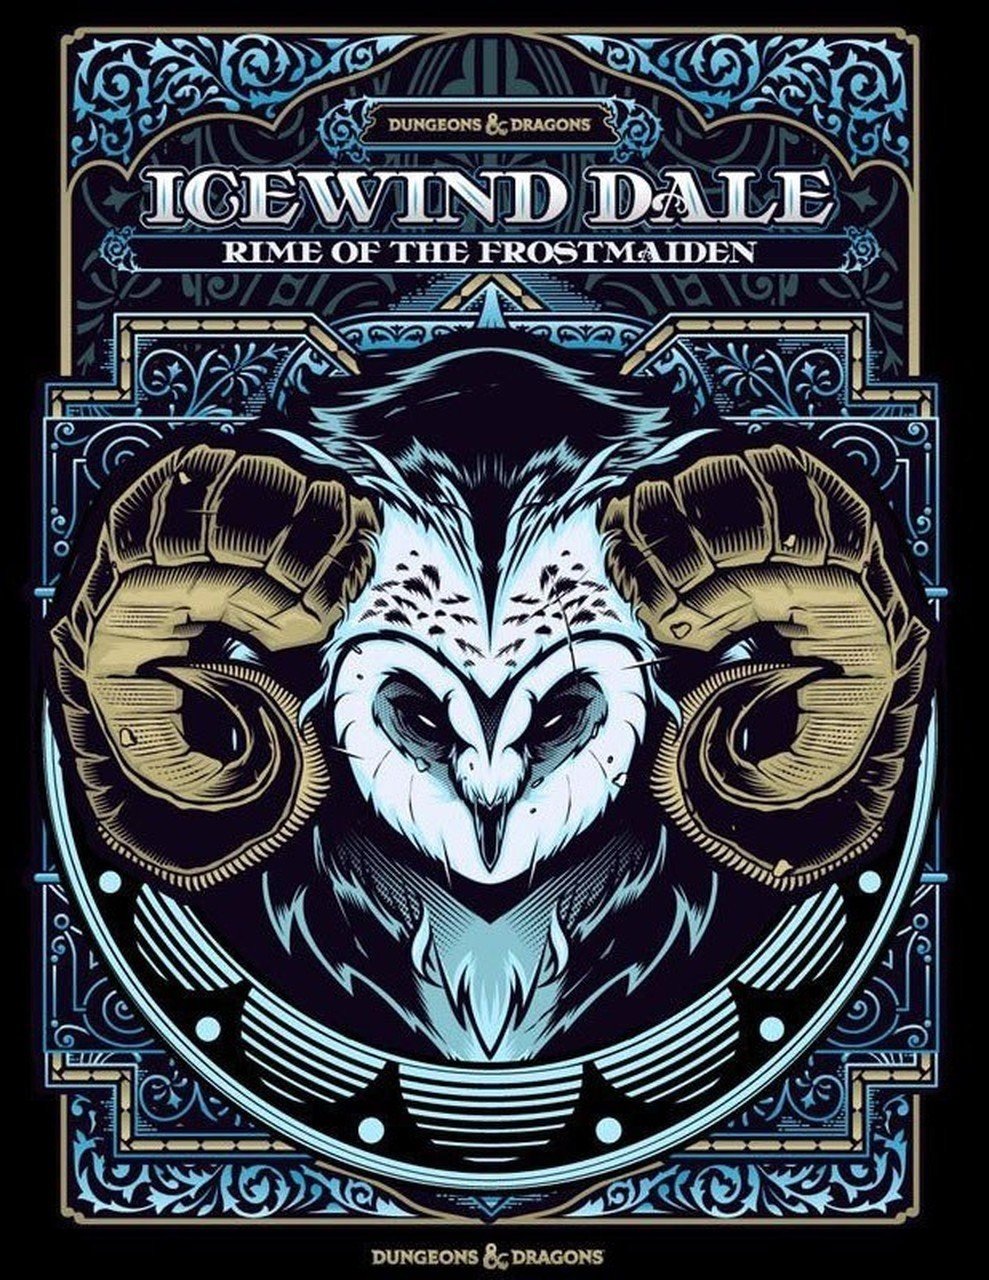 Dungeons & Dragons - Icewind Dale: Rime of the Frostmaiden (Alternate Art) - Good Games